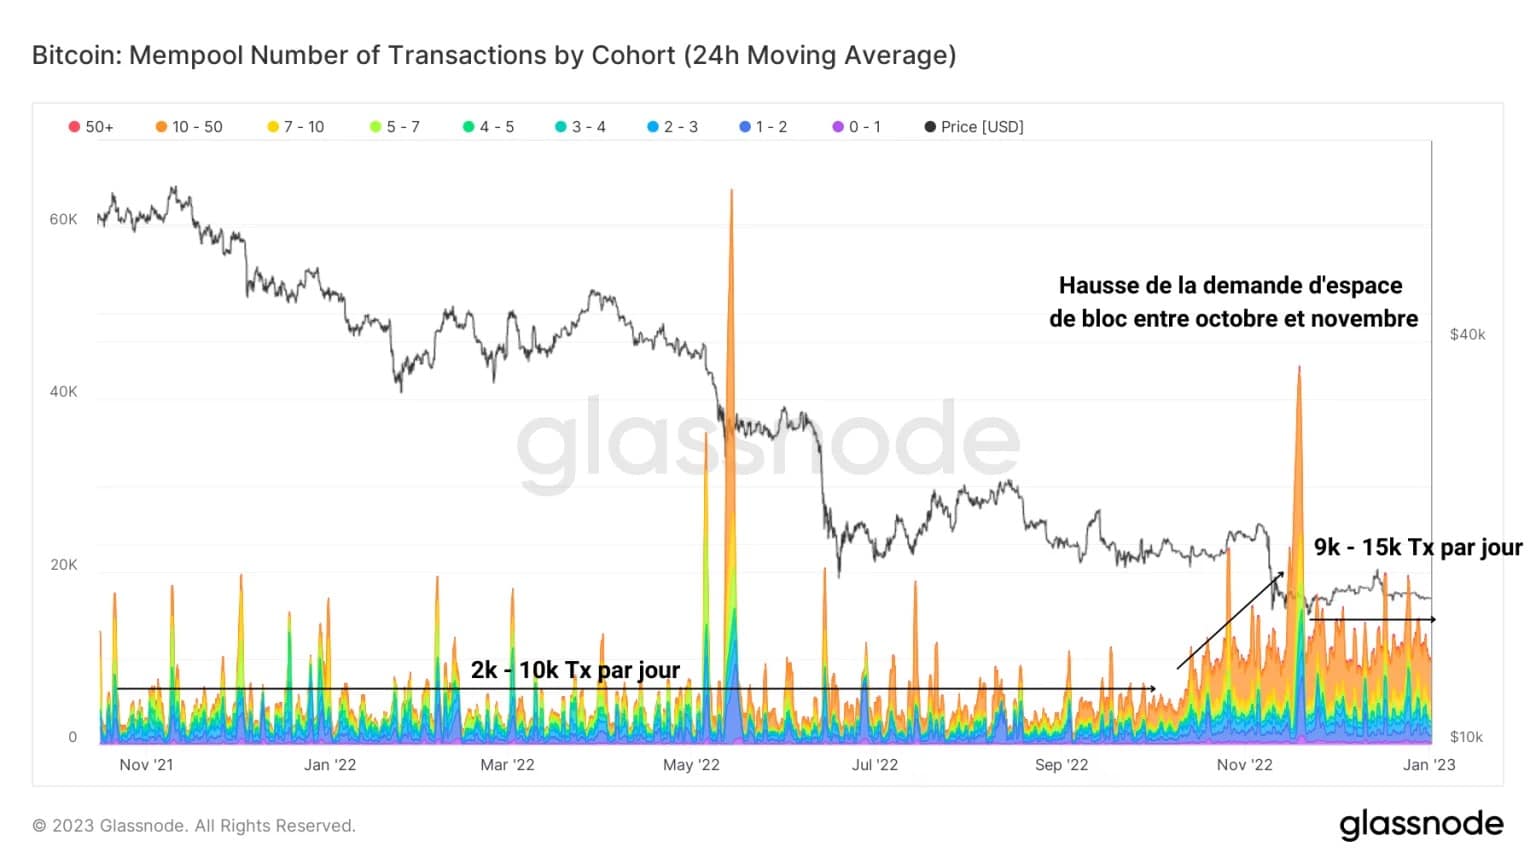 Figure 4: Bitcoin transactions in the mempool